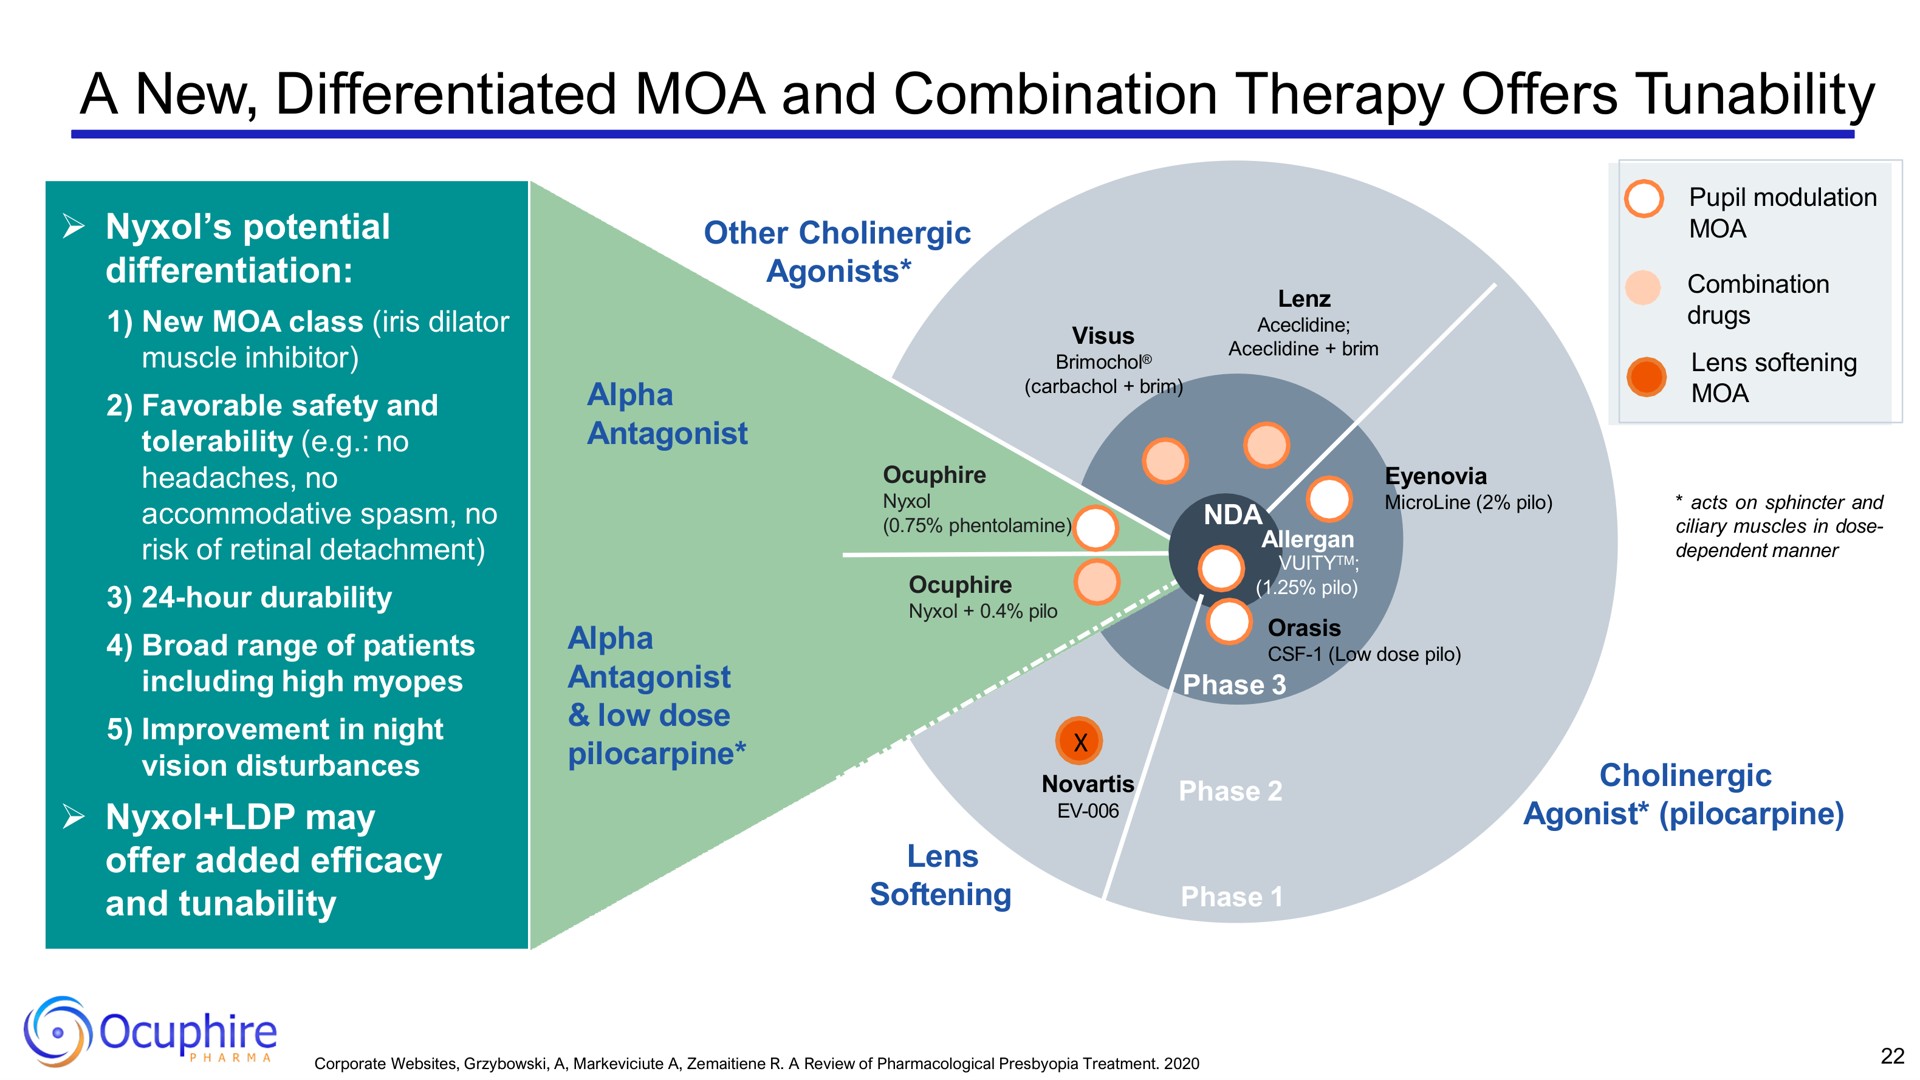 a new differentiated and combination therapy offers | Ocuphire Pharma